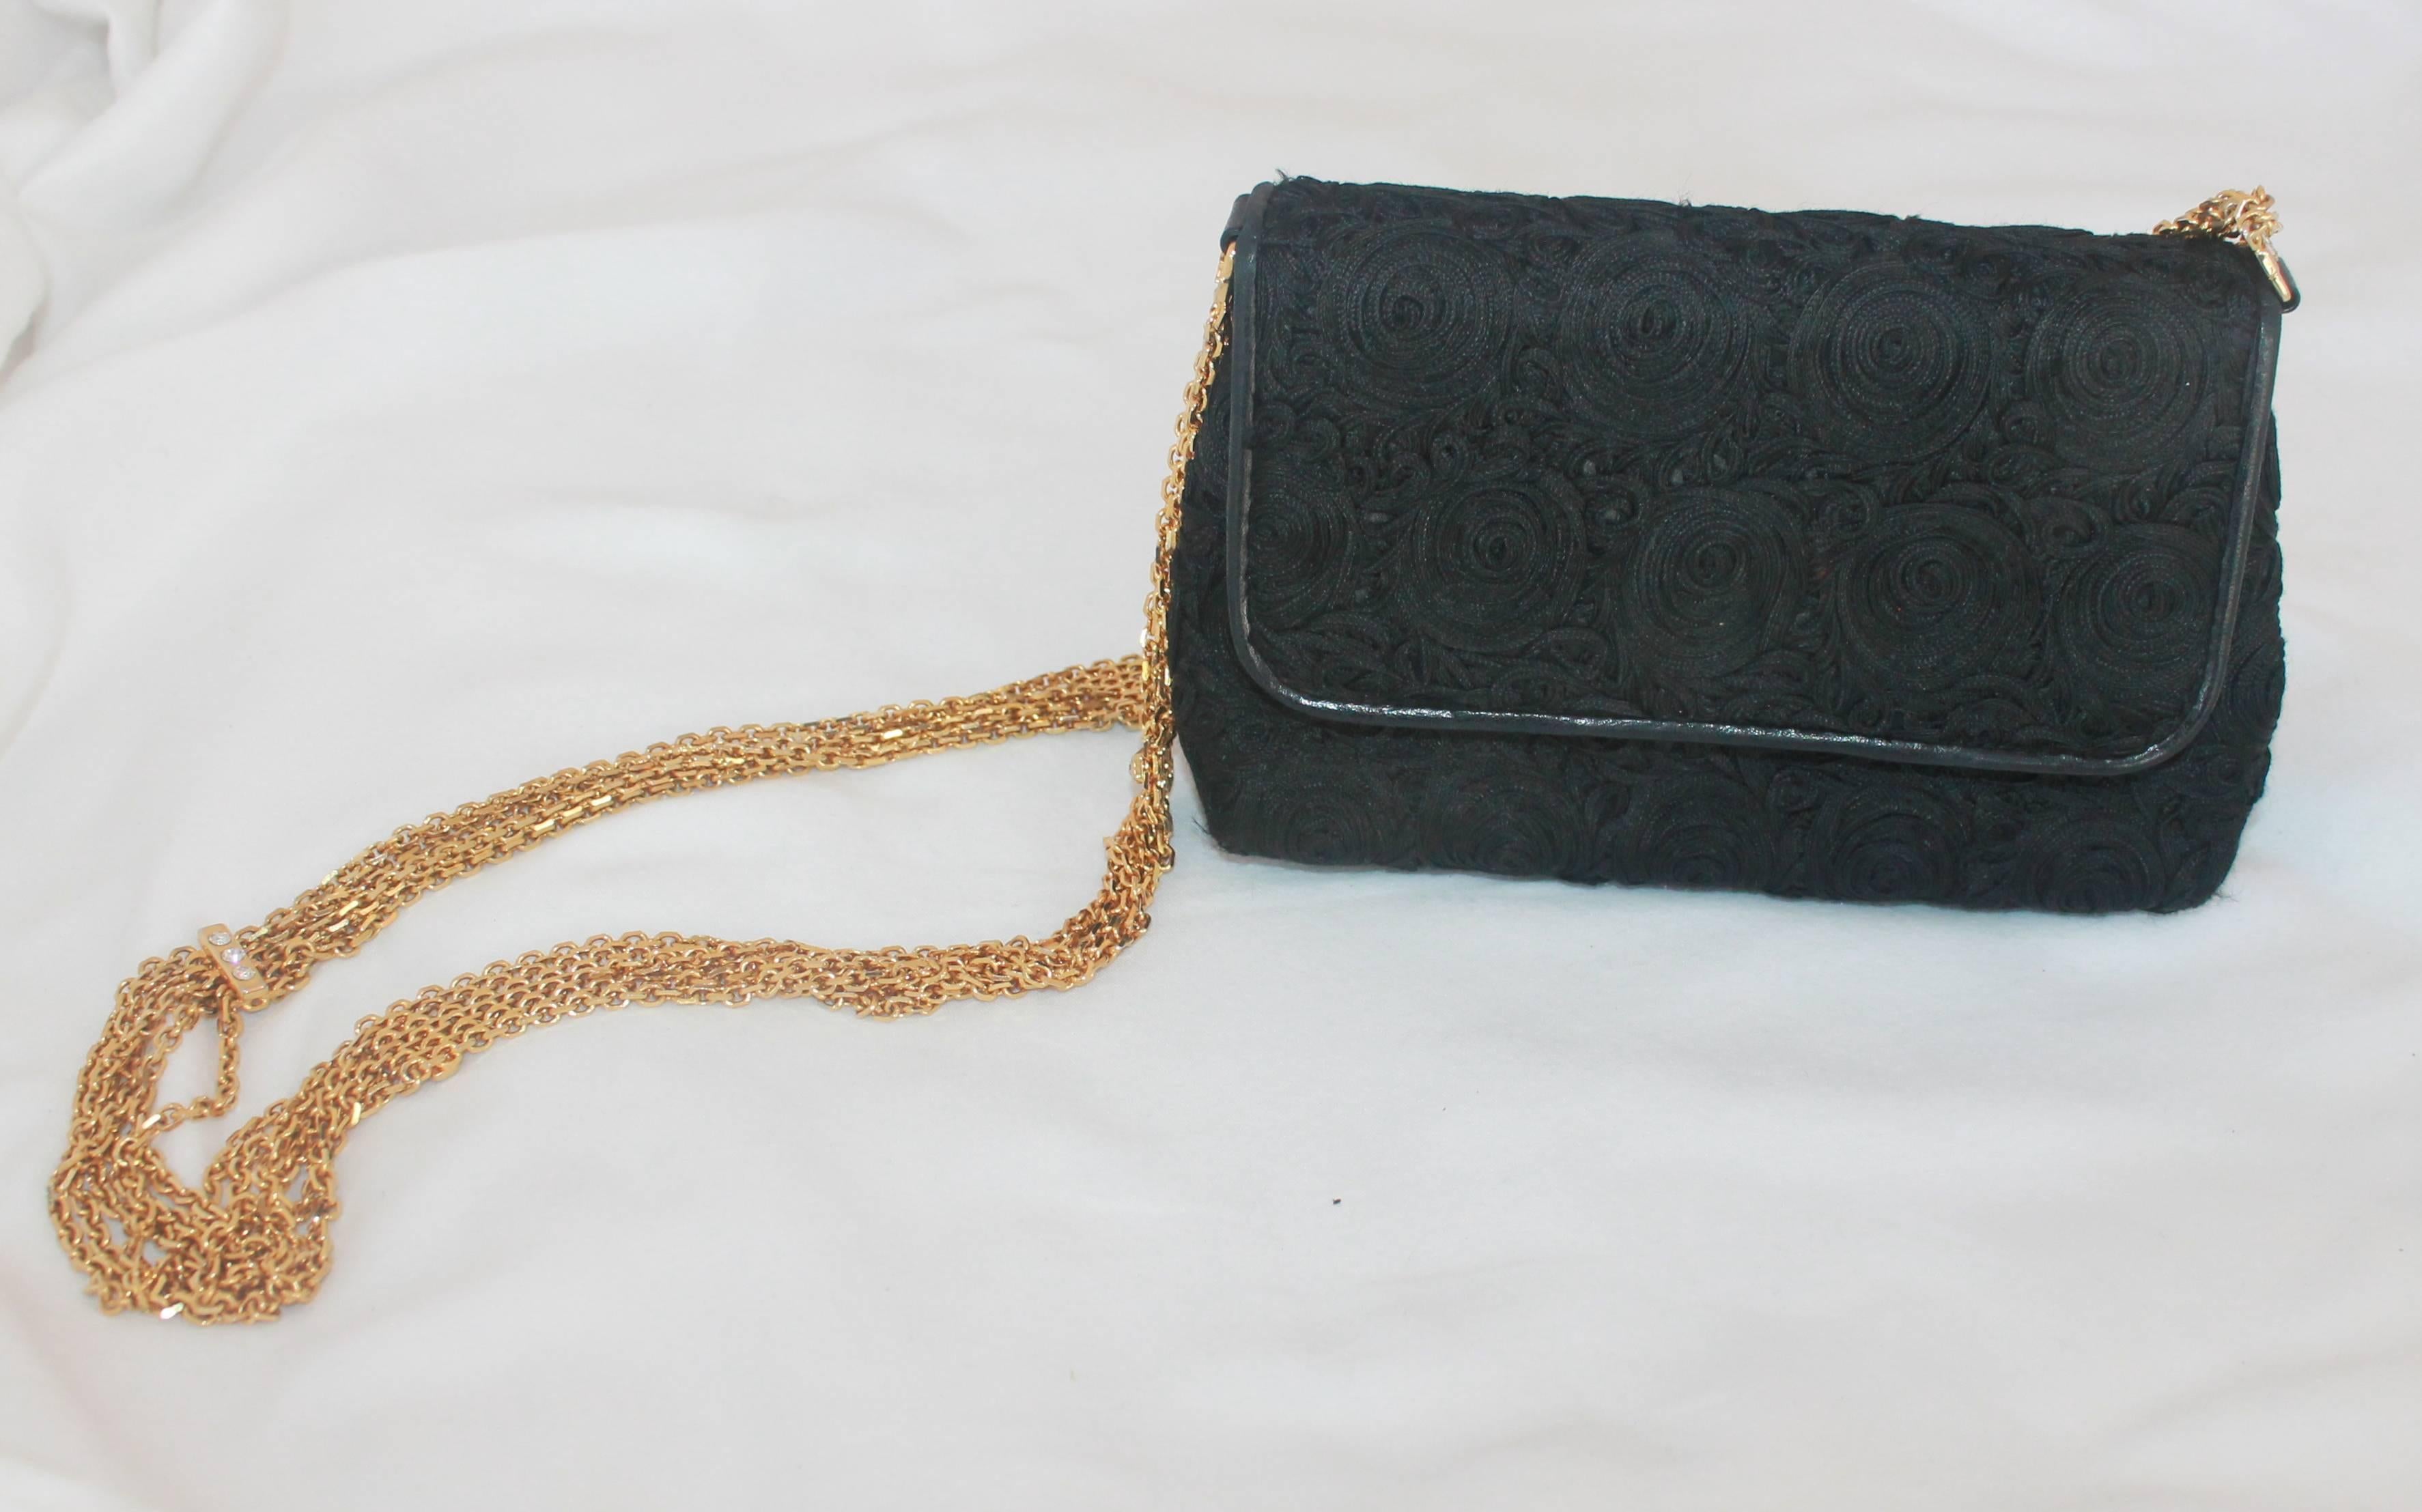 Chanel Black Lace Soutache and Leather Evening Bag - Circa Late 1980's. This beautiful, vintage, Chanel evening bag can be worn over the shoulder or as a crossbody. It is in very good condition and features a single flap, six gold strands with